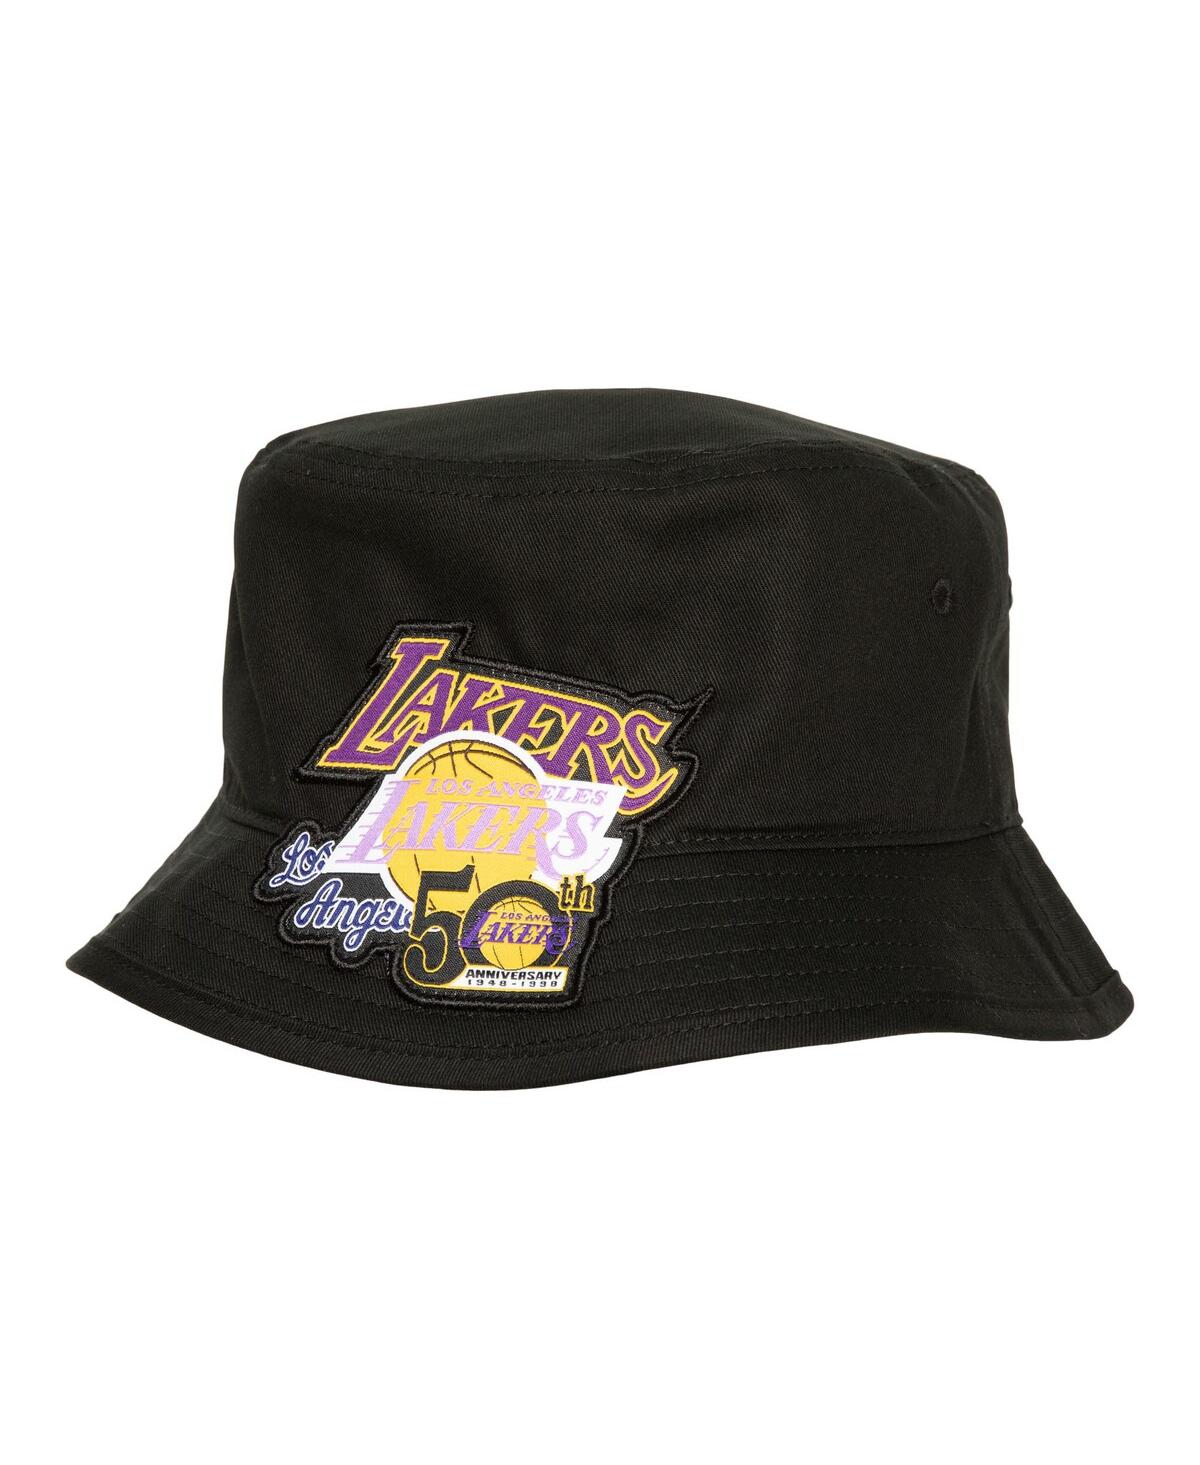 Shop Mitchell & Ness Men's  Black Los Angeles Lakers 50th Anniversary Bucket Hat